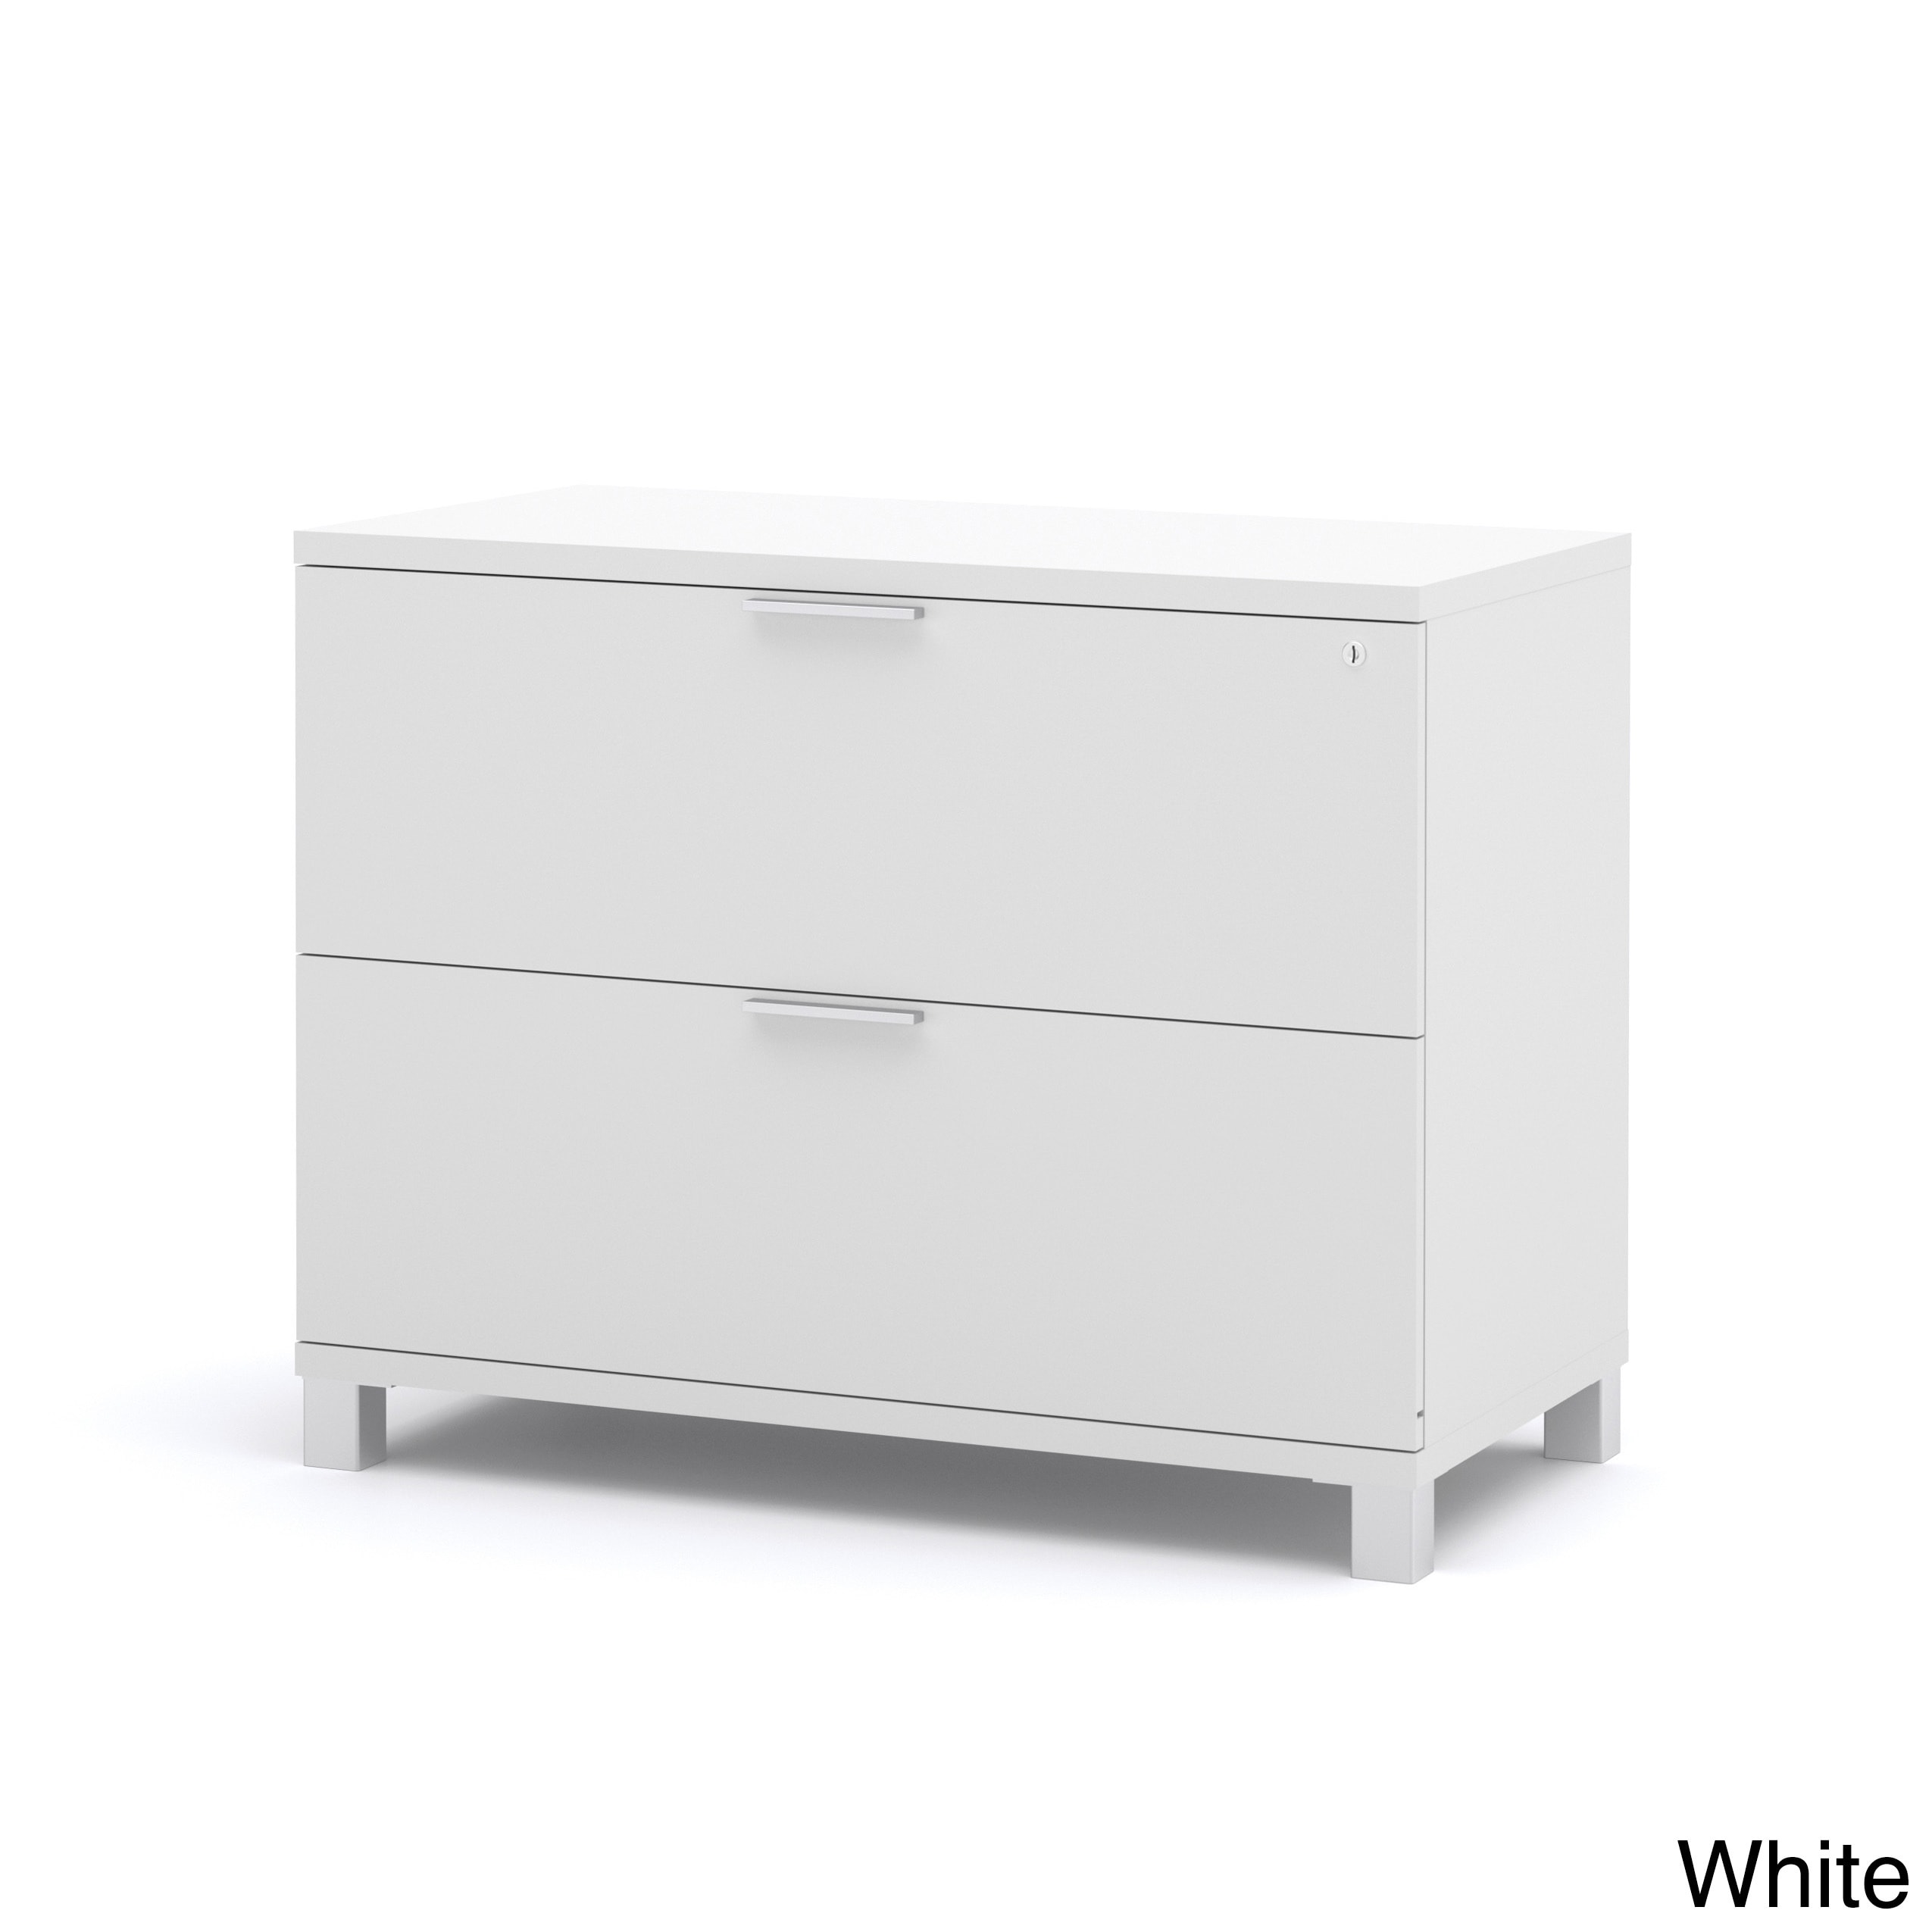 Shop Bestar Pro Linea Assembled Lateral File Overstock 20603156